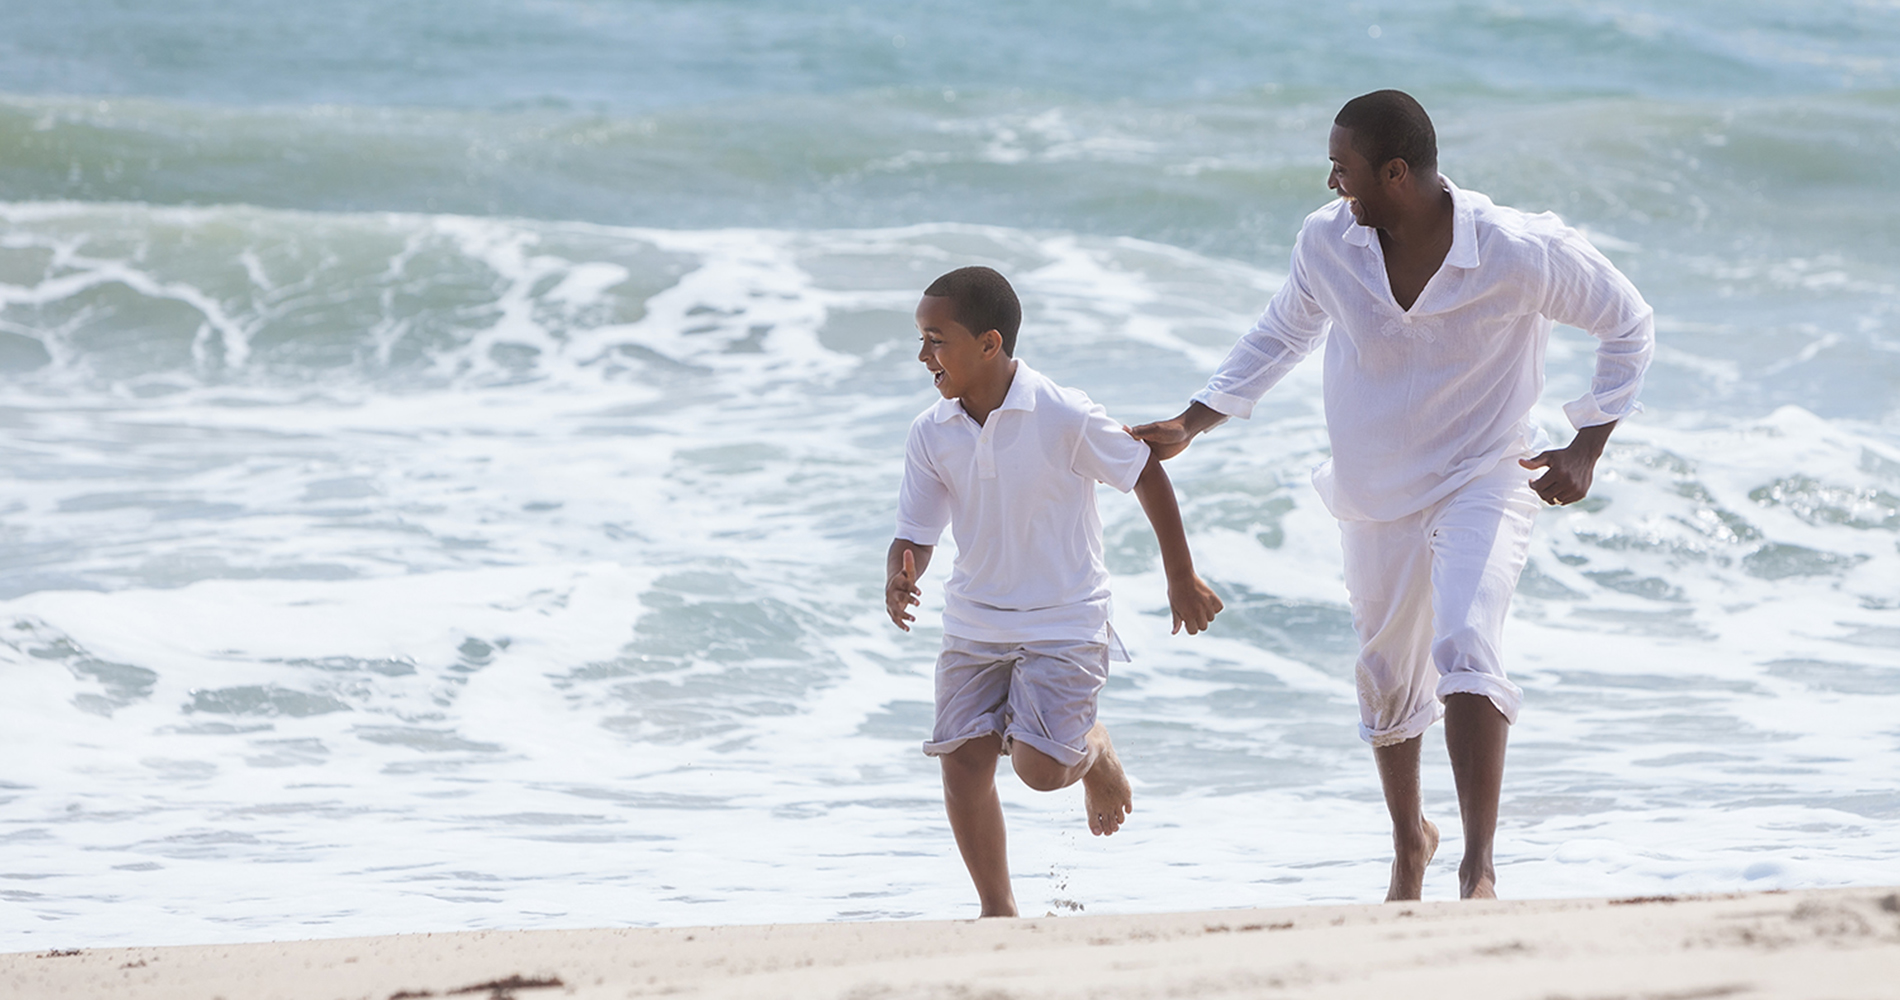 A happy African American family of father and son, man & boy child, running and having fun in the sand and waves of a sunny beach